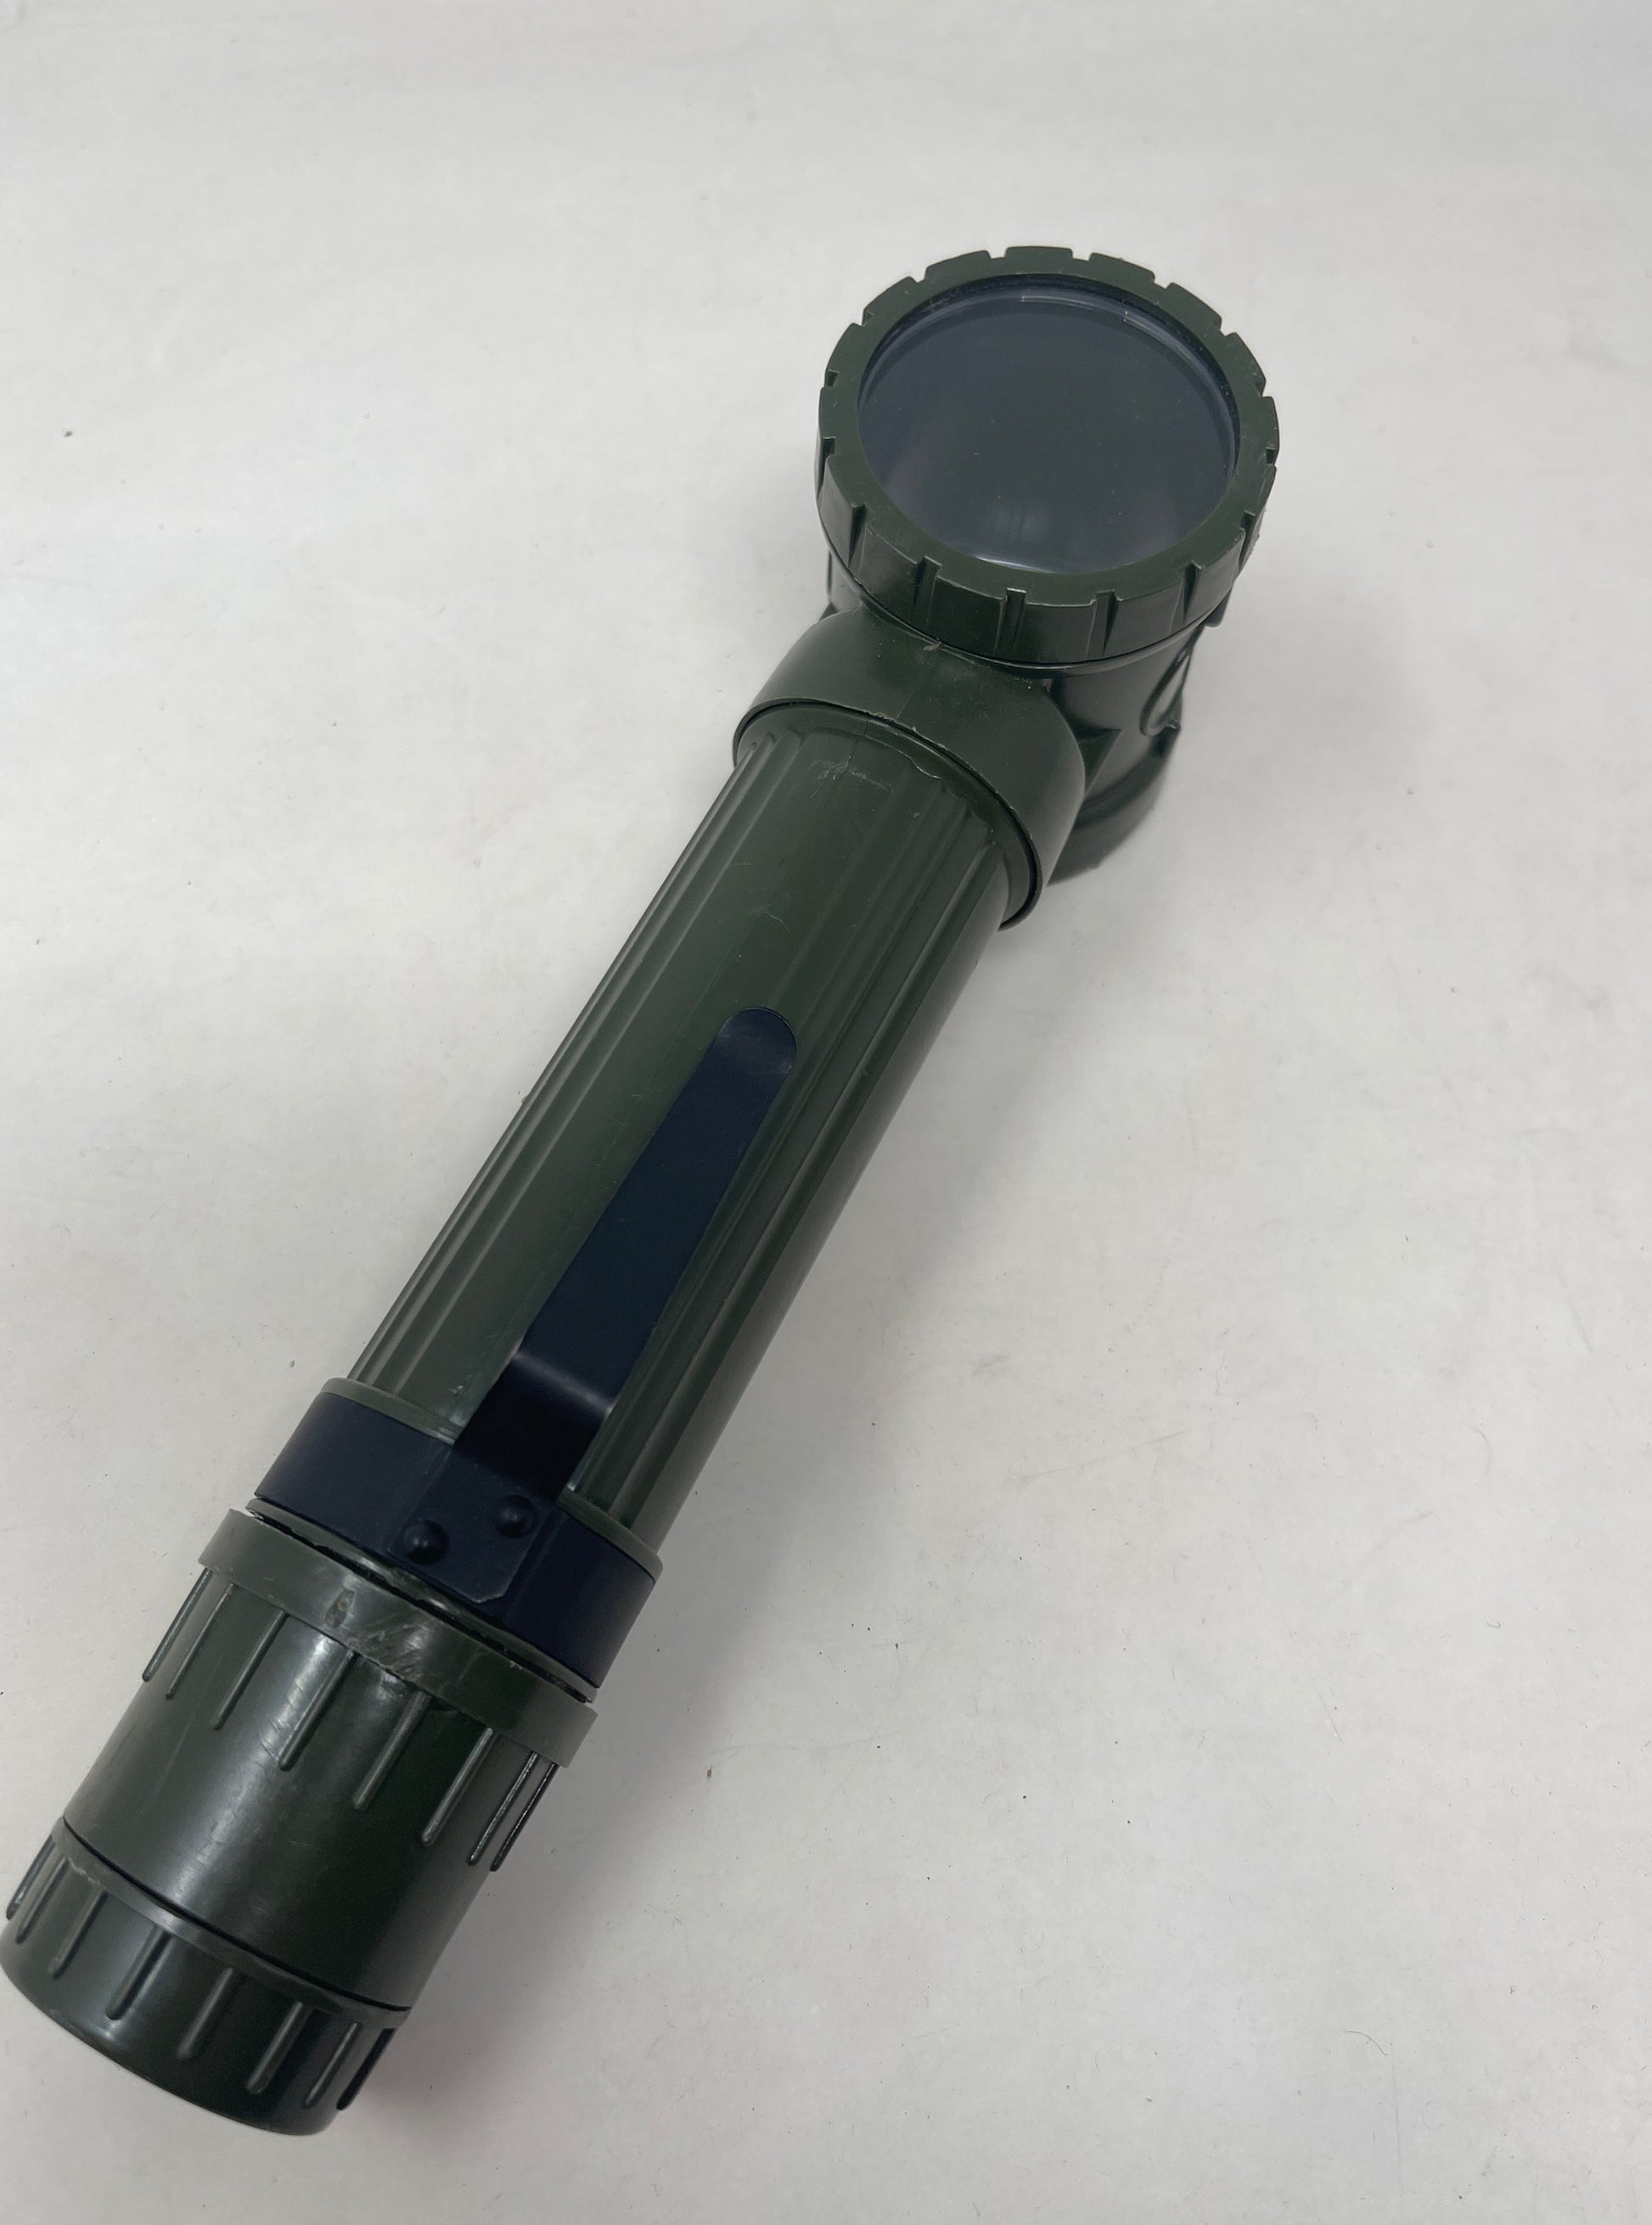 British Army Magnifying Torch For Reading Maps